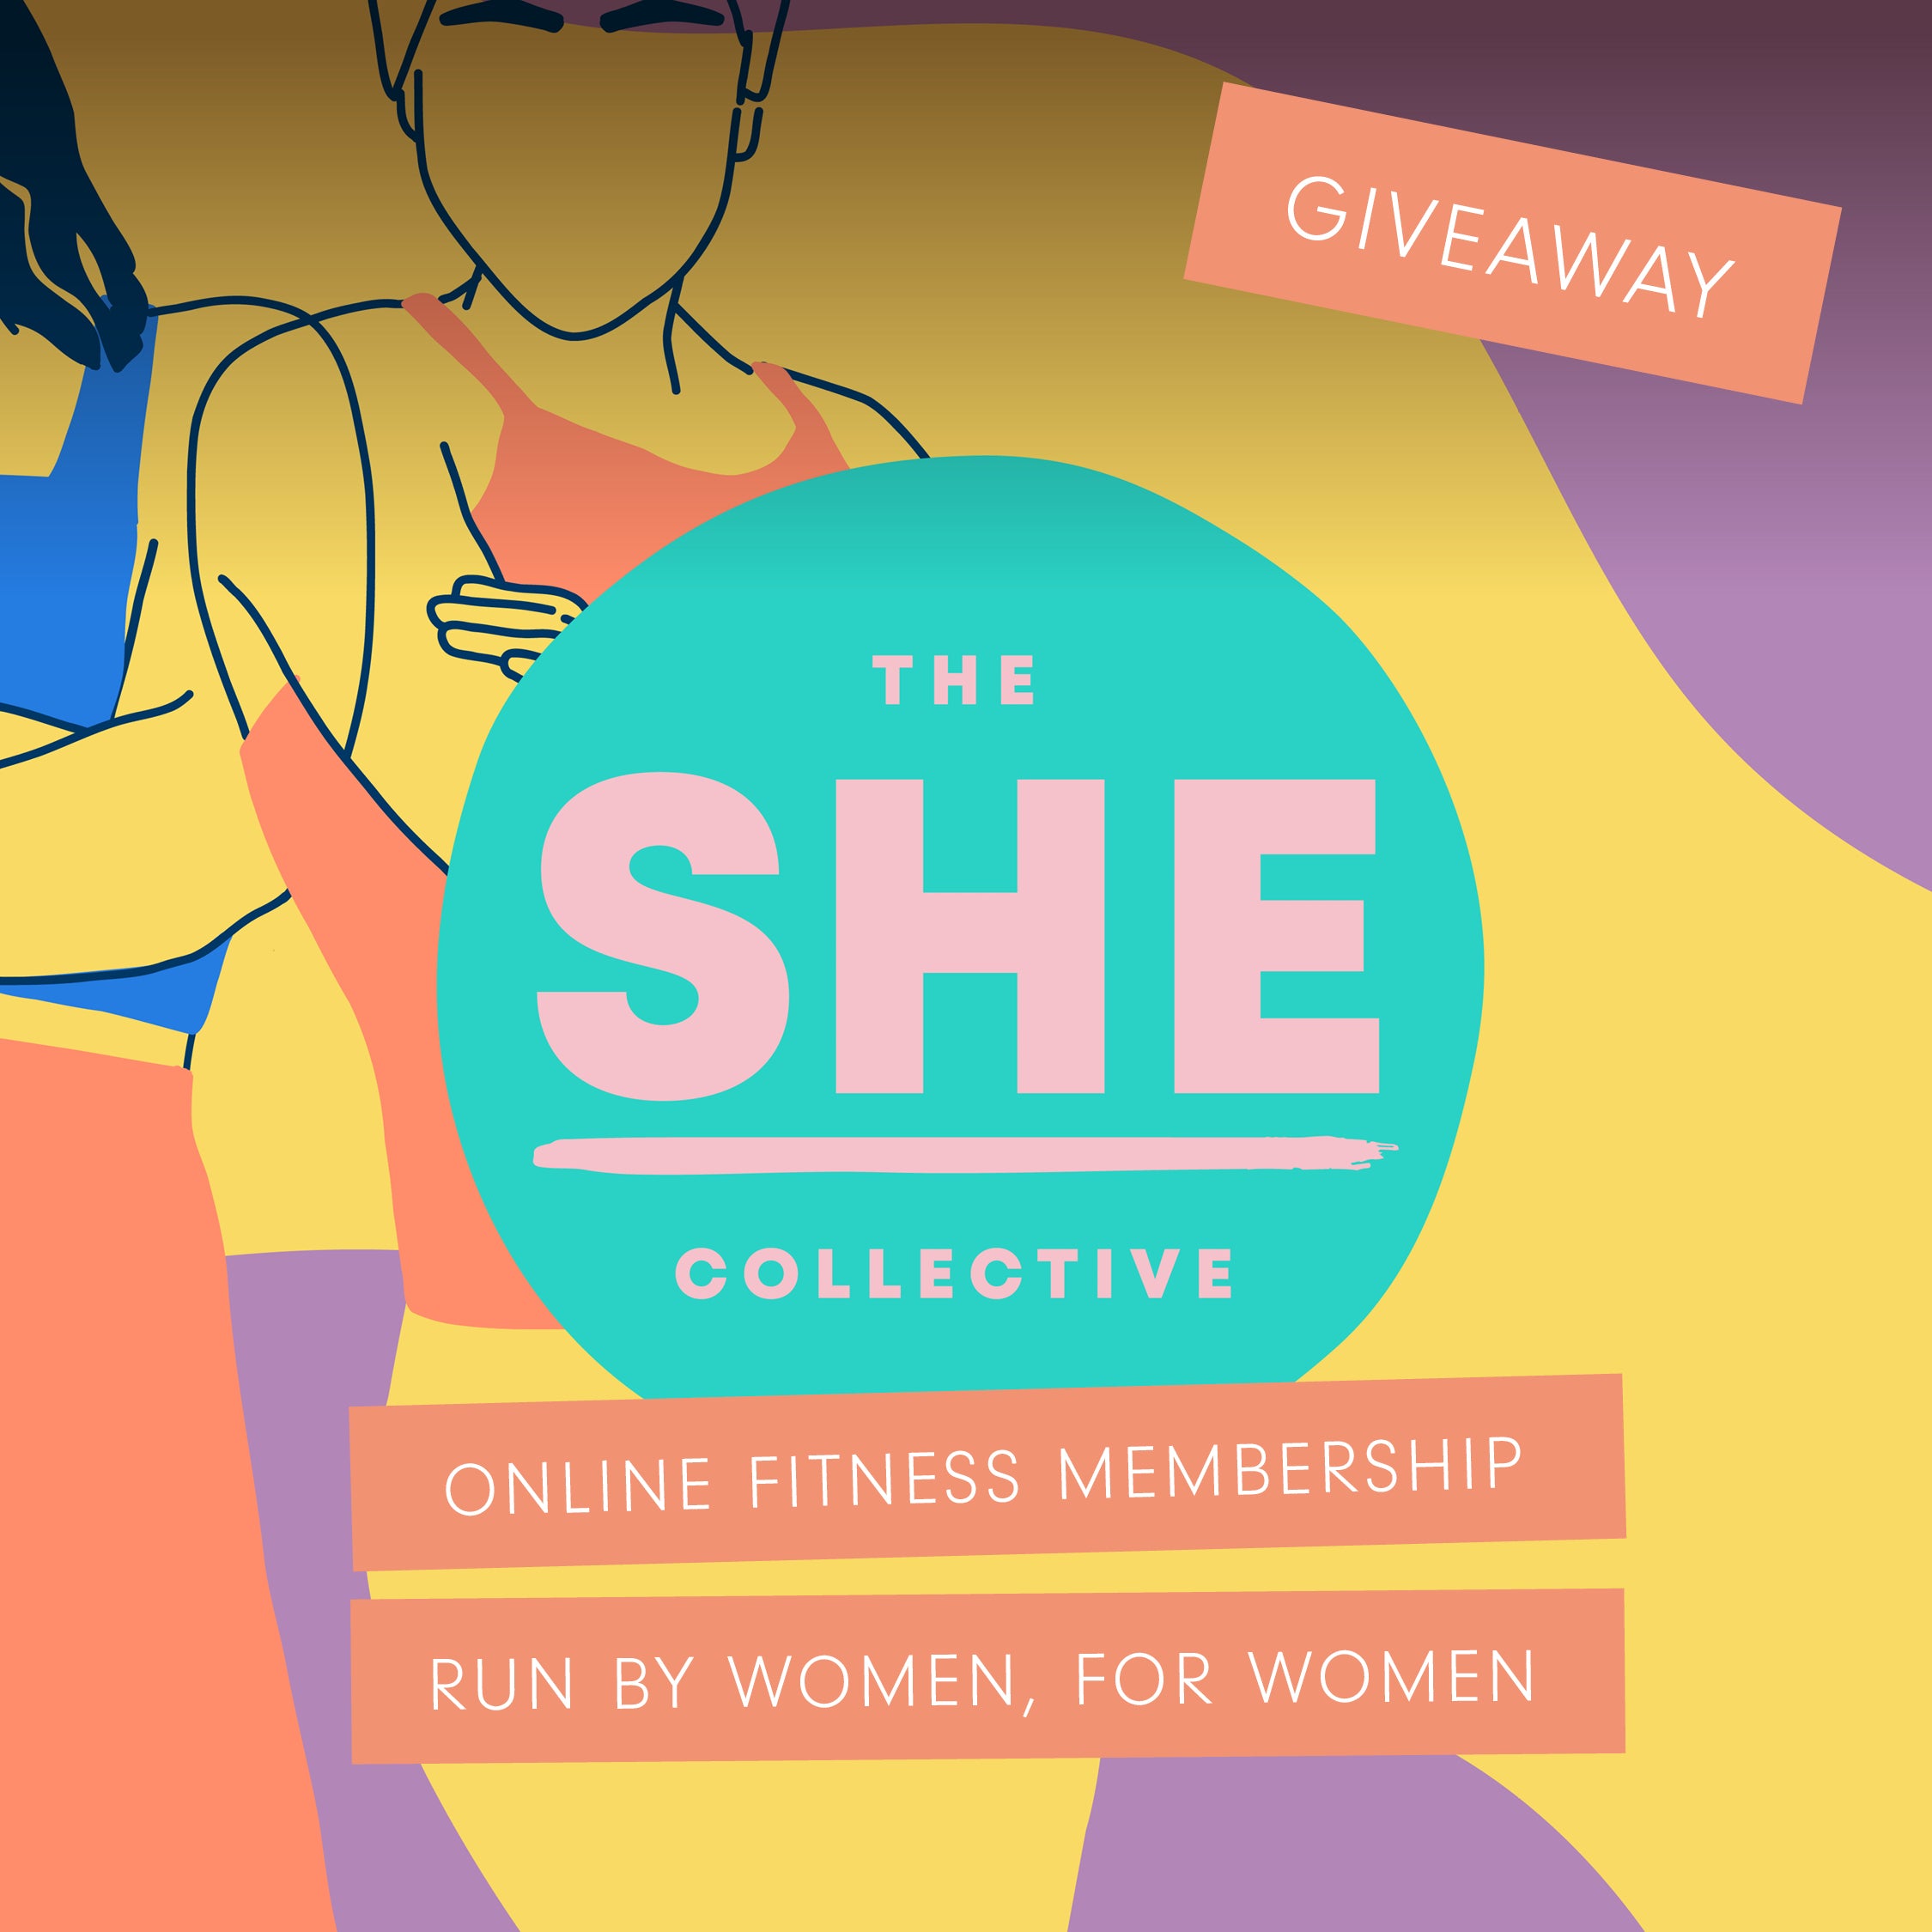 Pre & Postpartum Fitness Advice From Ro, Founder of The SHE Collective